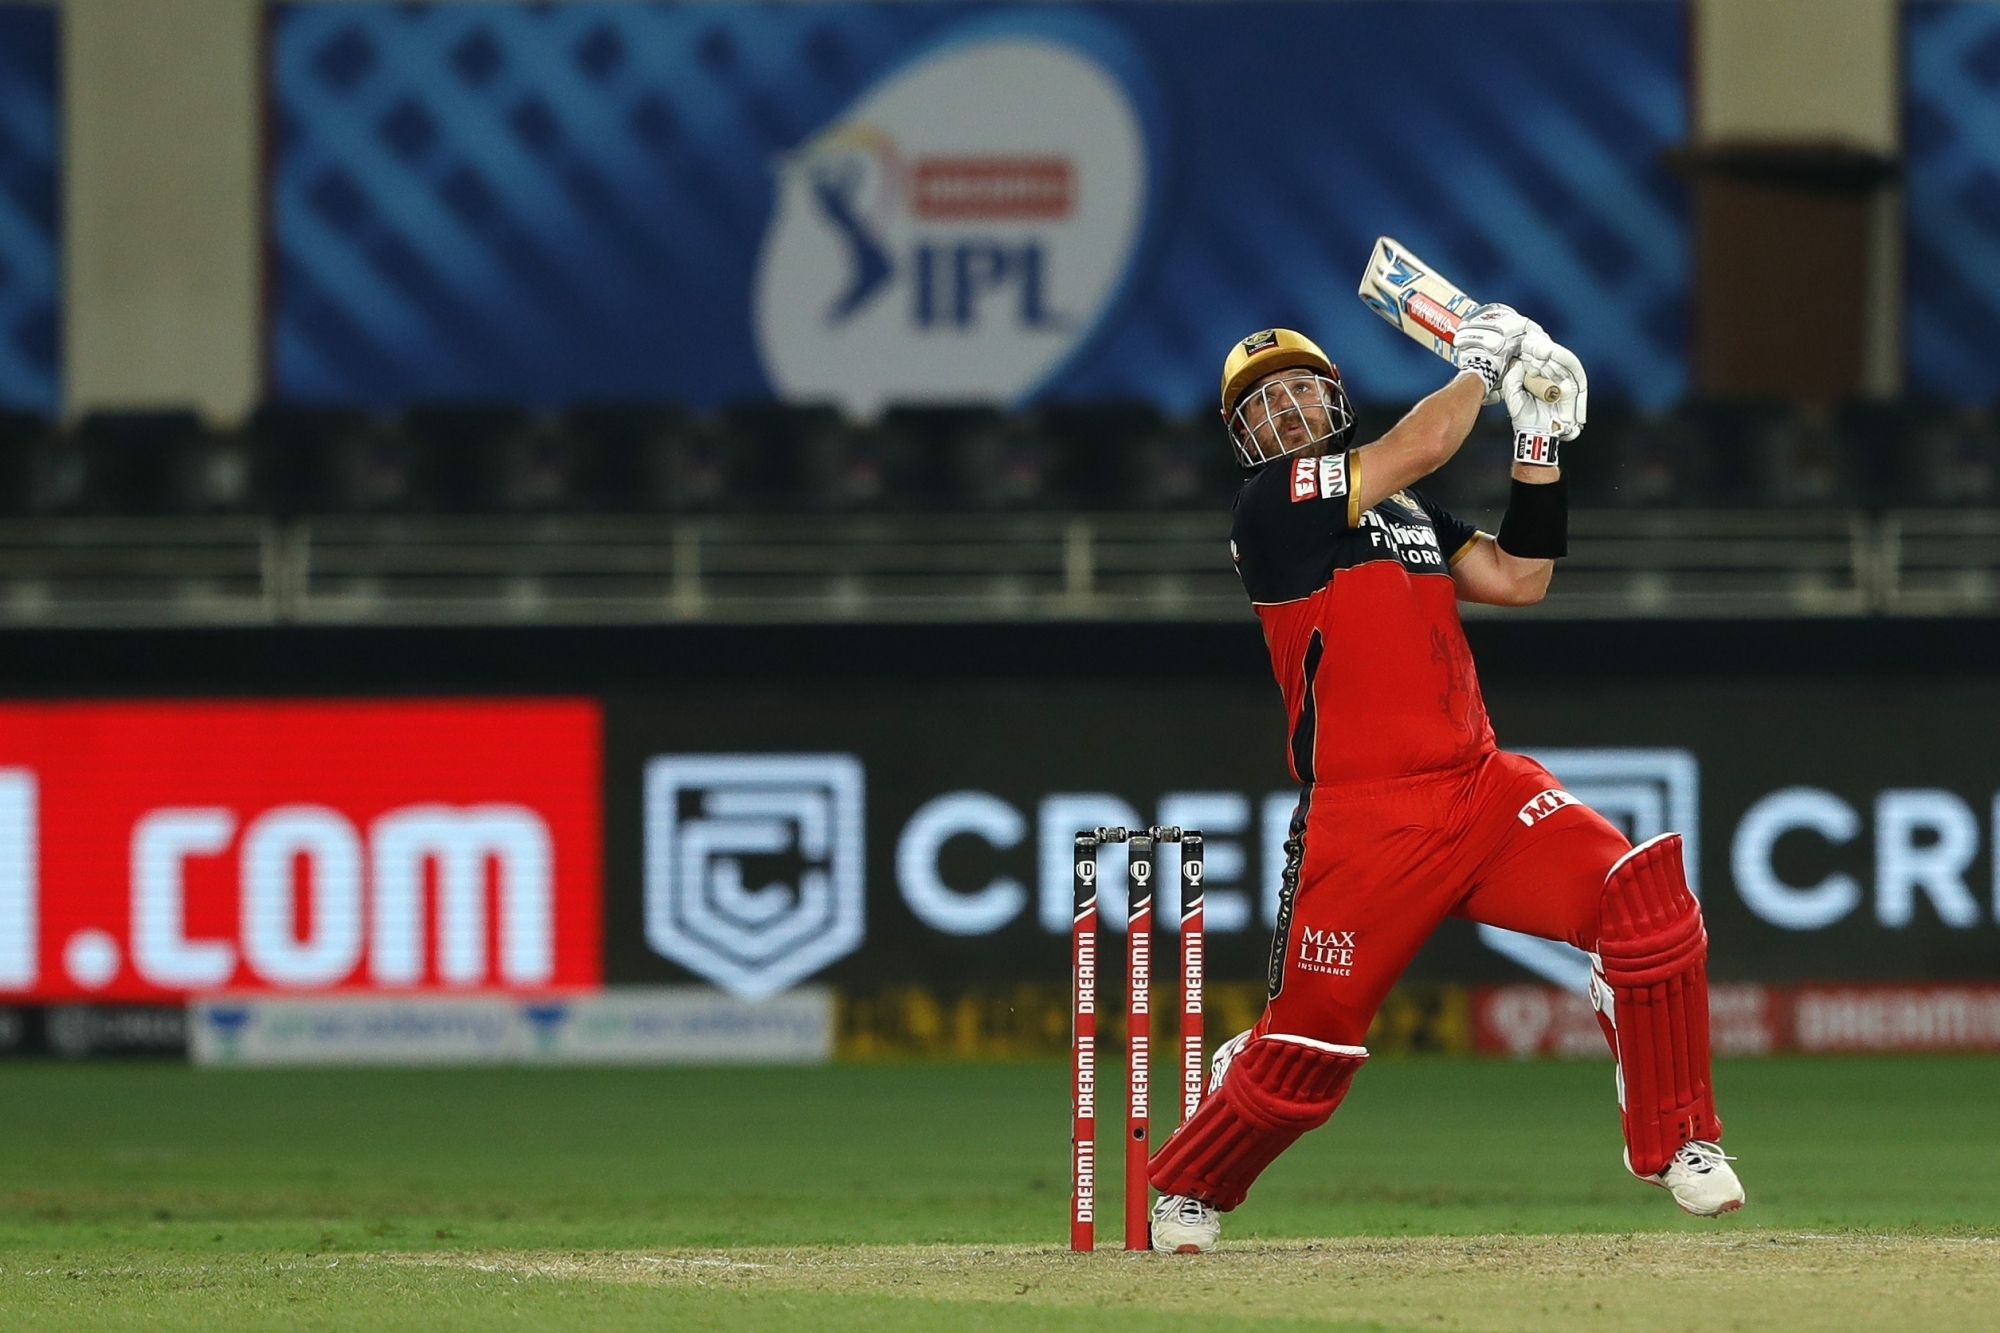 Aaron Finch remained unsold at the IPL 2021 auction | IANS